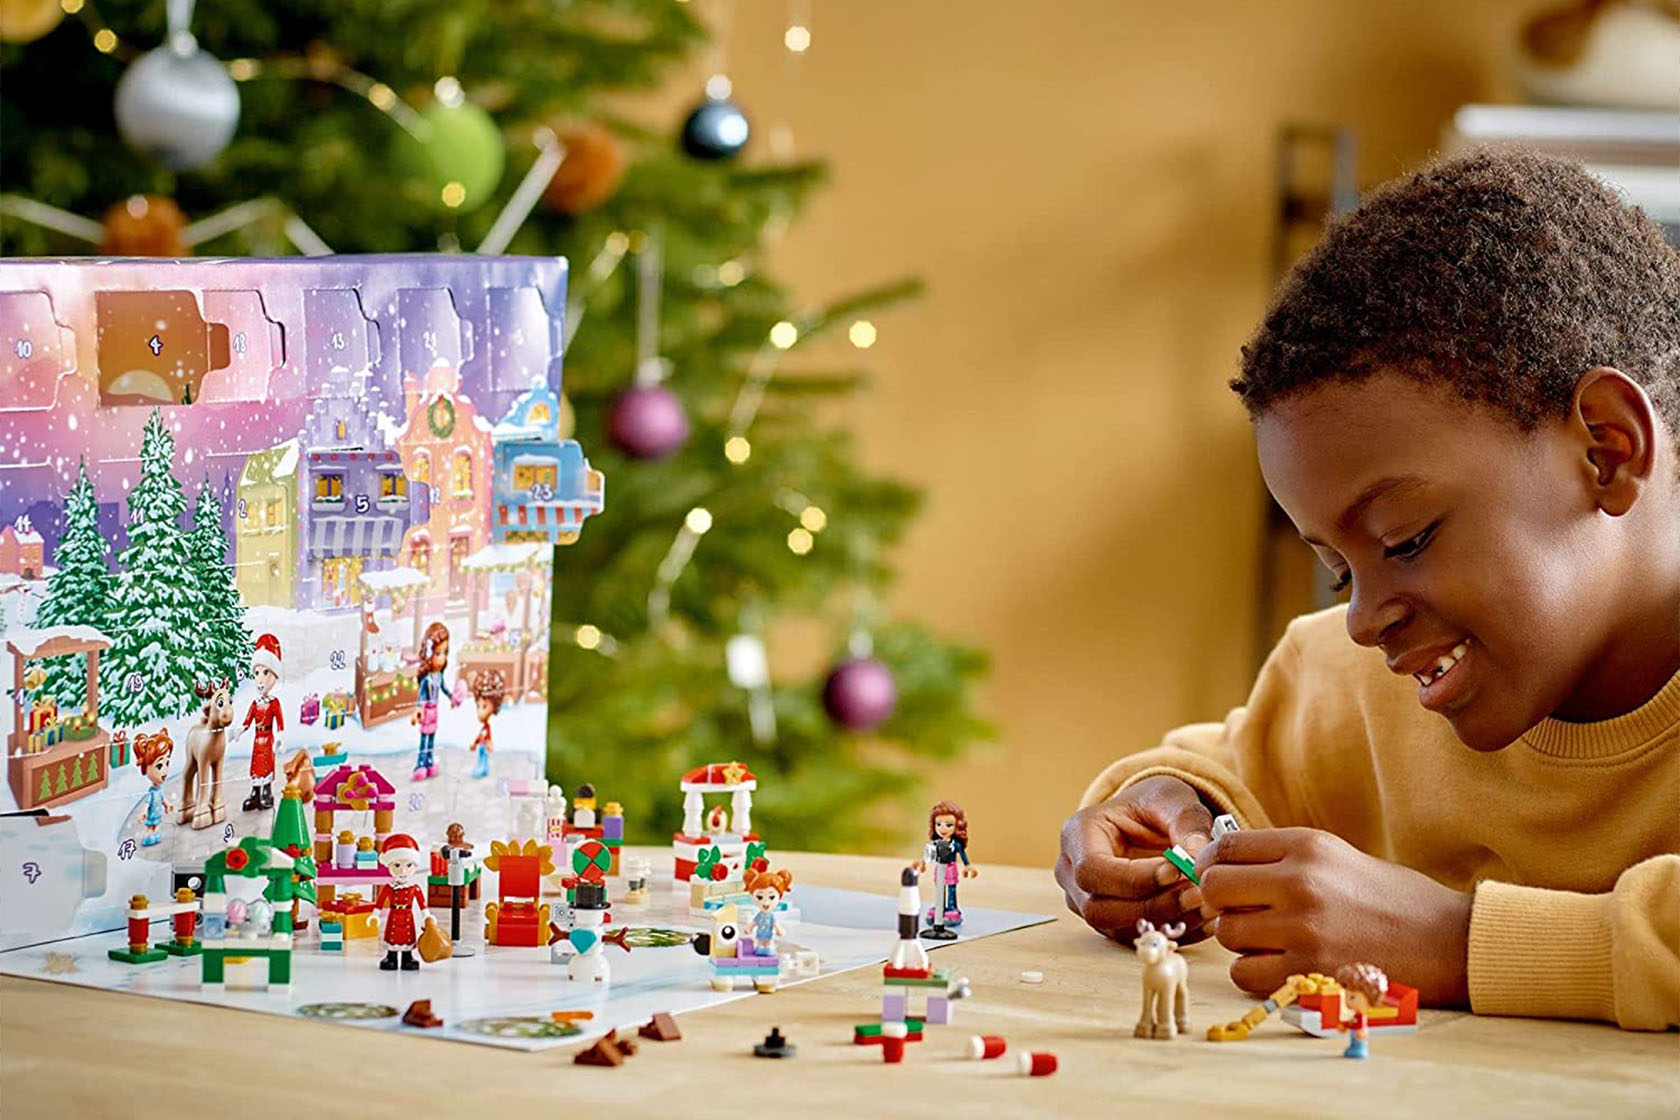 This LEGO Advent calendar is on sale at Amazon for 36 off